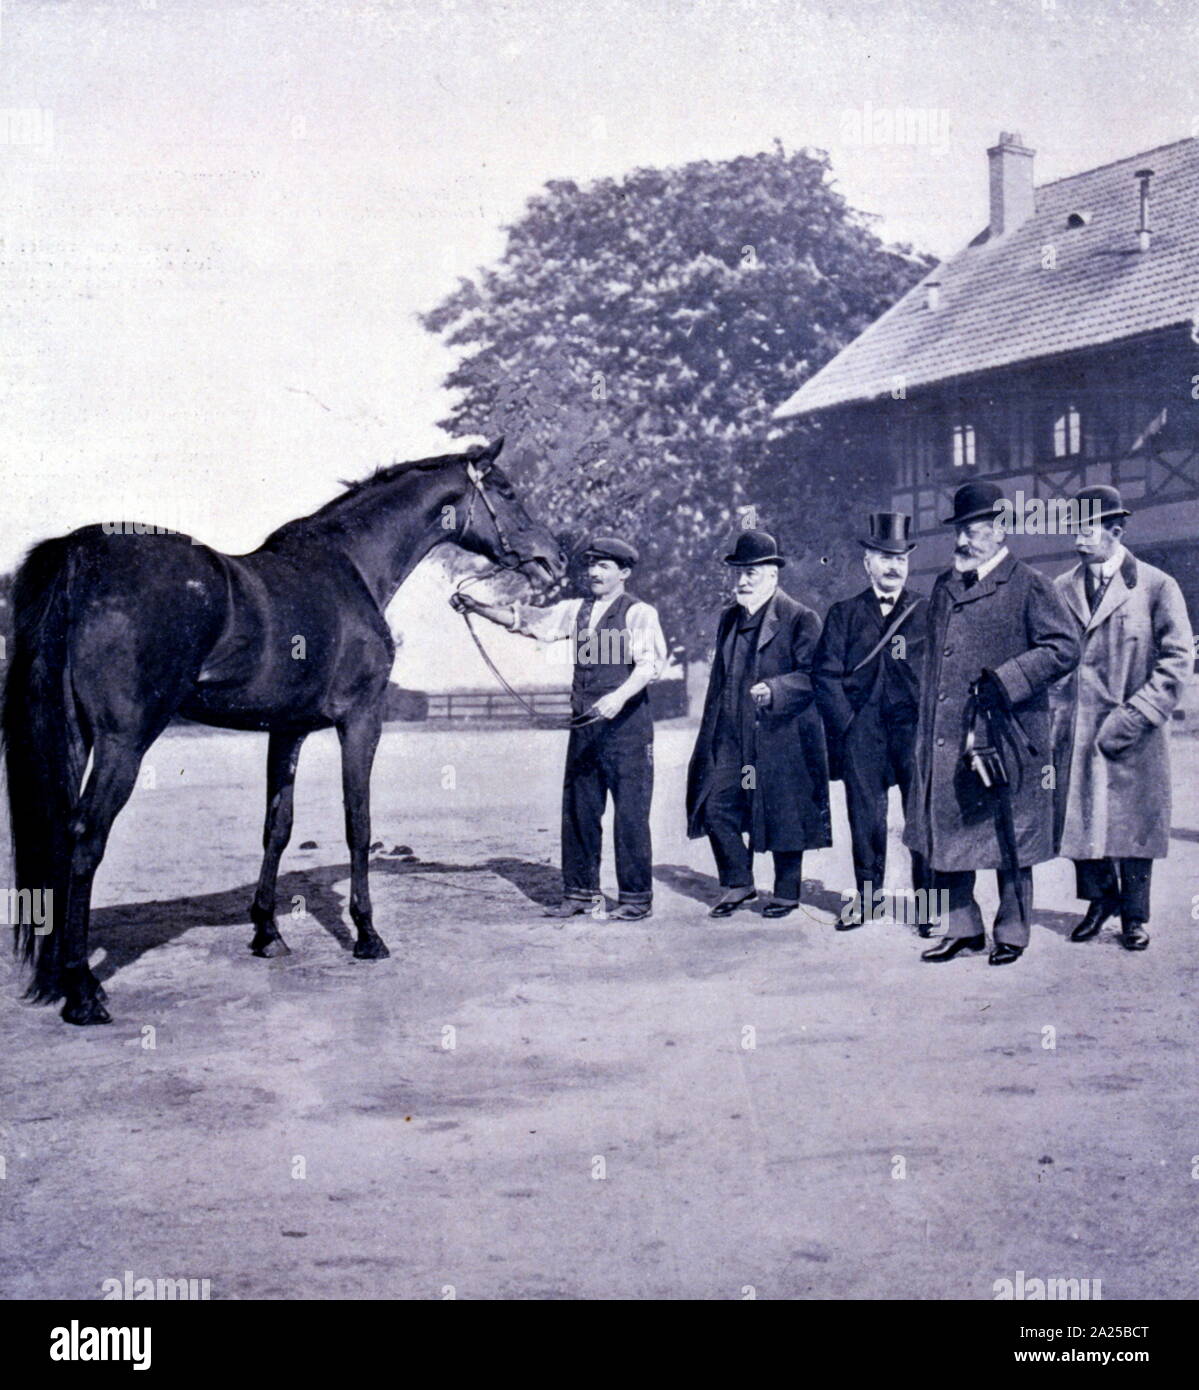 King Edward VII of Great Britain attends the 1905, Haras de Jardy, Thoroughbred horse breeding operation established in 1890 in Marnes-la-Coquette France Stock Photo